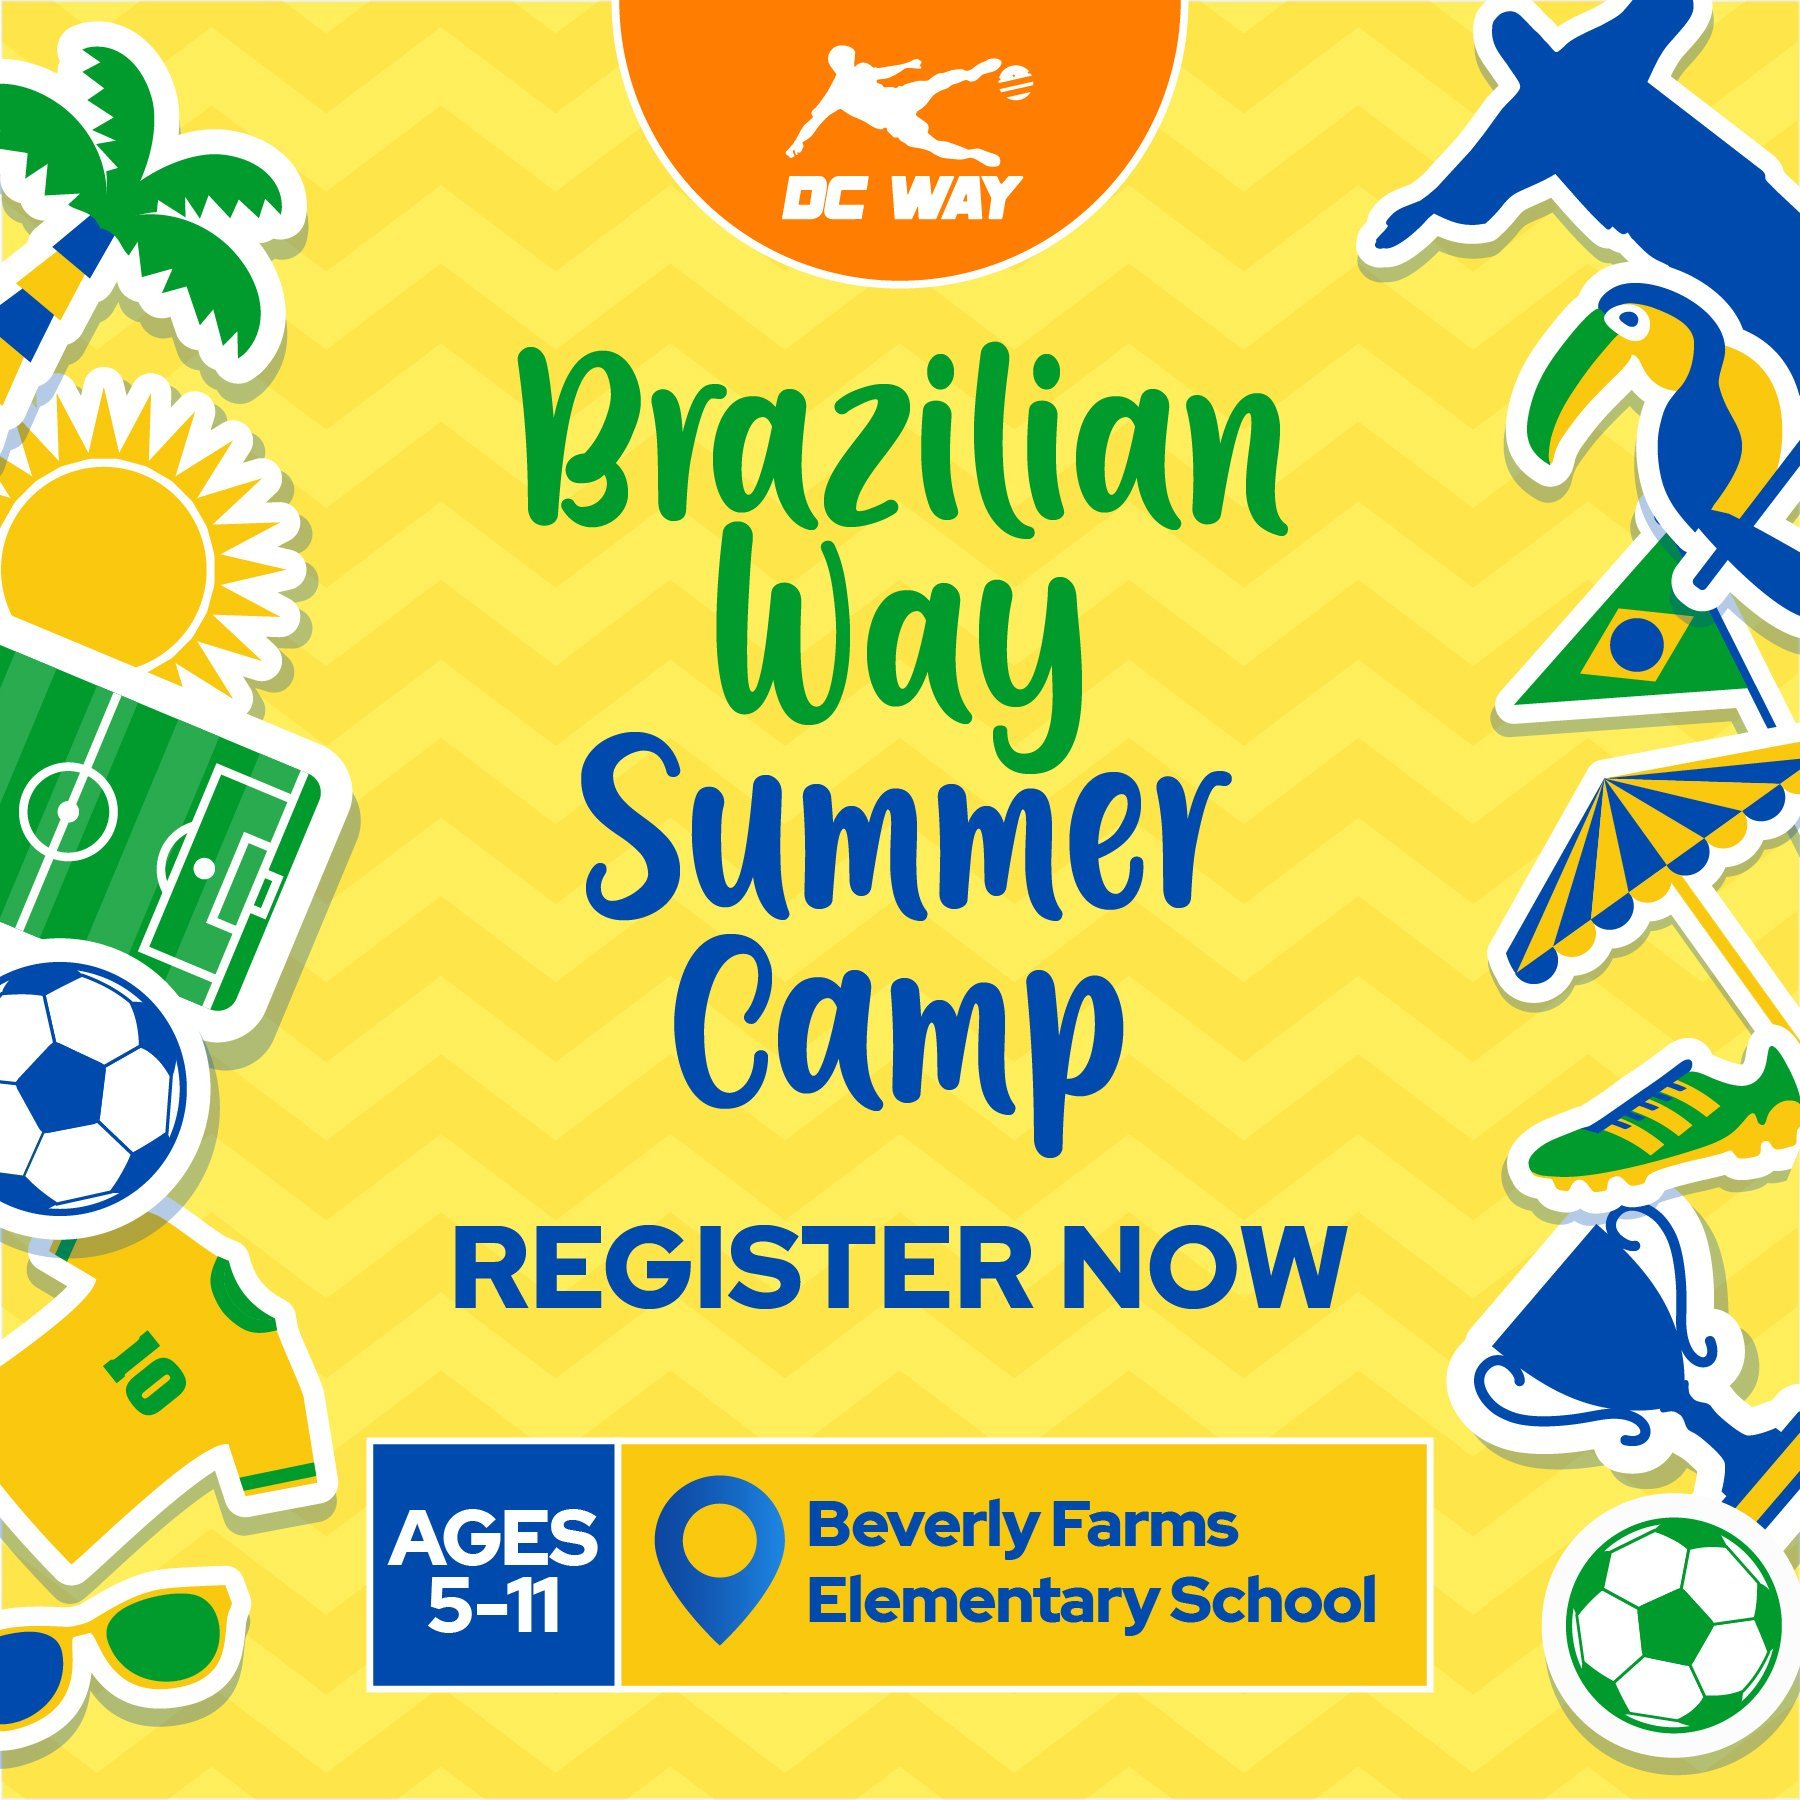 Have you ever imagined immersing yourself in the spirit of Brazil while refining your soccer skills? 🇧🇷 Introducing our Brazilian Way Summer Camp - where soccer meets culture - an unforgettable experience for ages 5-11! 🌟
 
From arts and crafts to